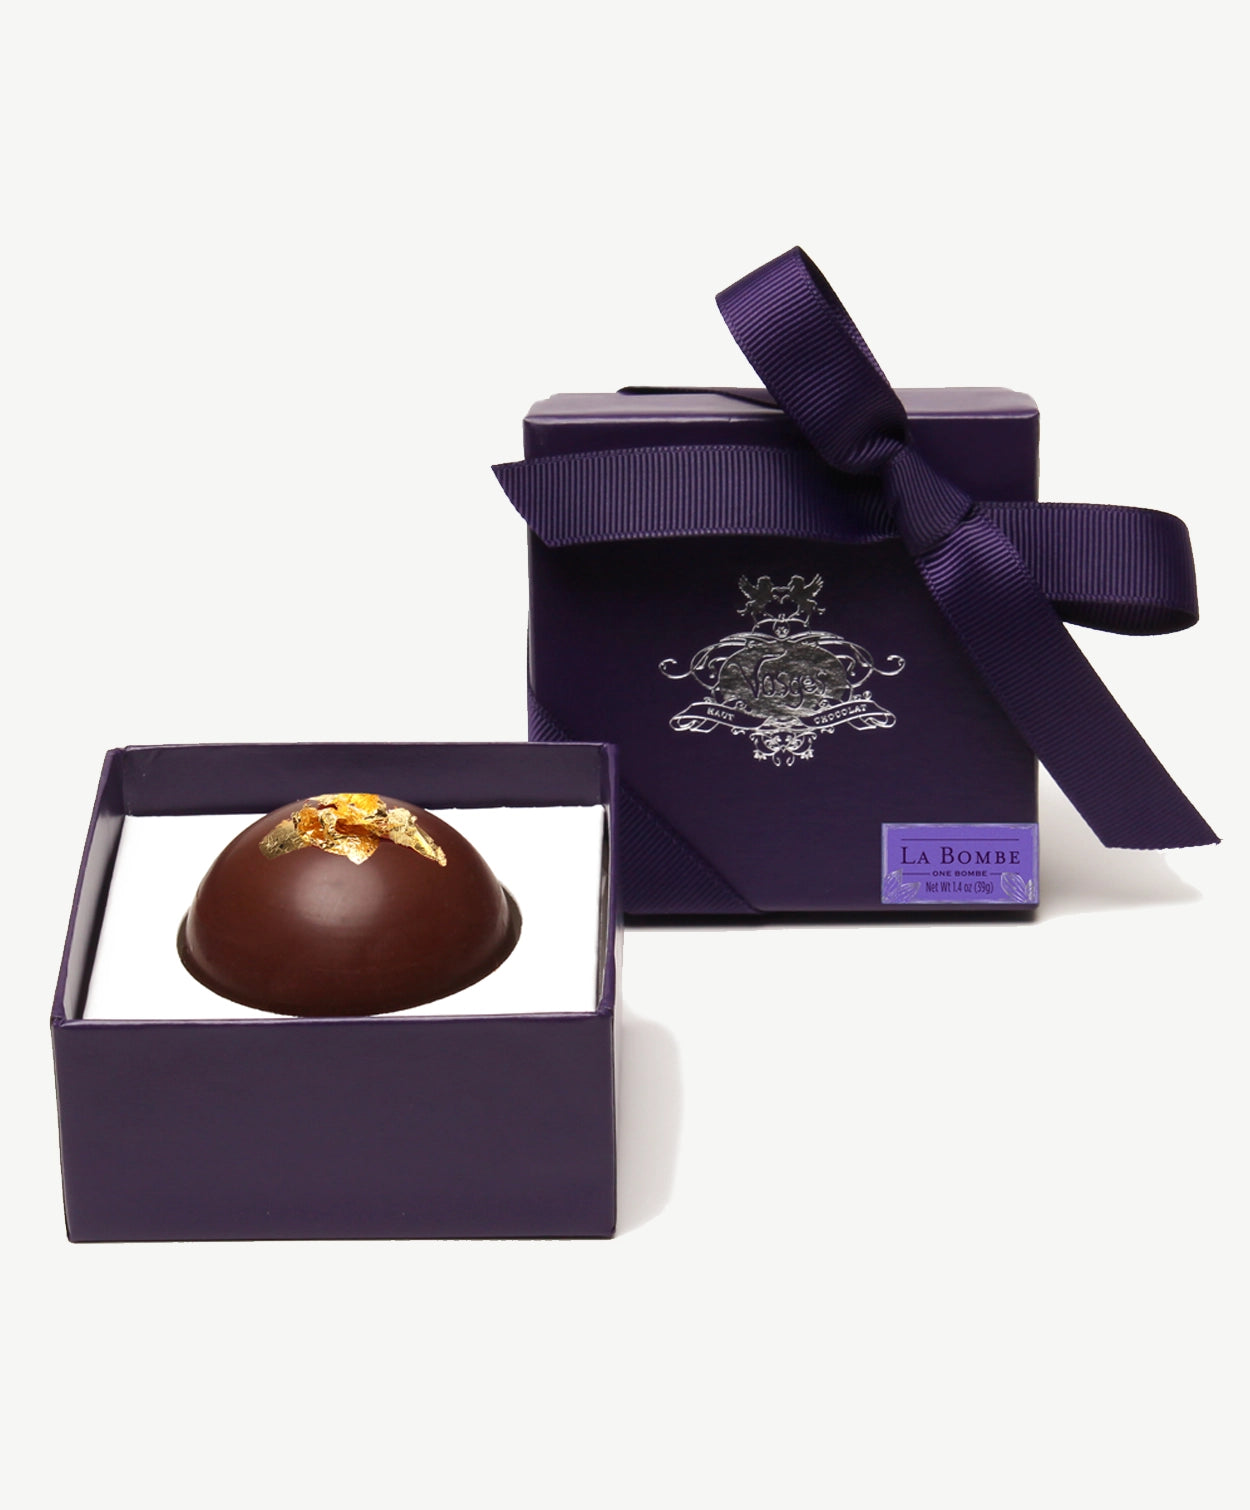 A large hazelnut Reishi mushroom chocolate bombalina truffle in an opened purple candy box standing upright tied with a purple ribbon bow on a white background.